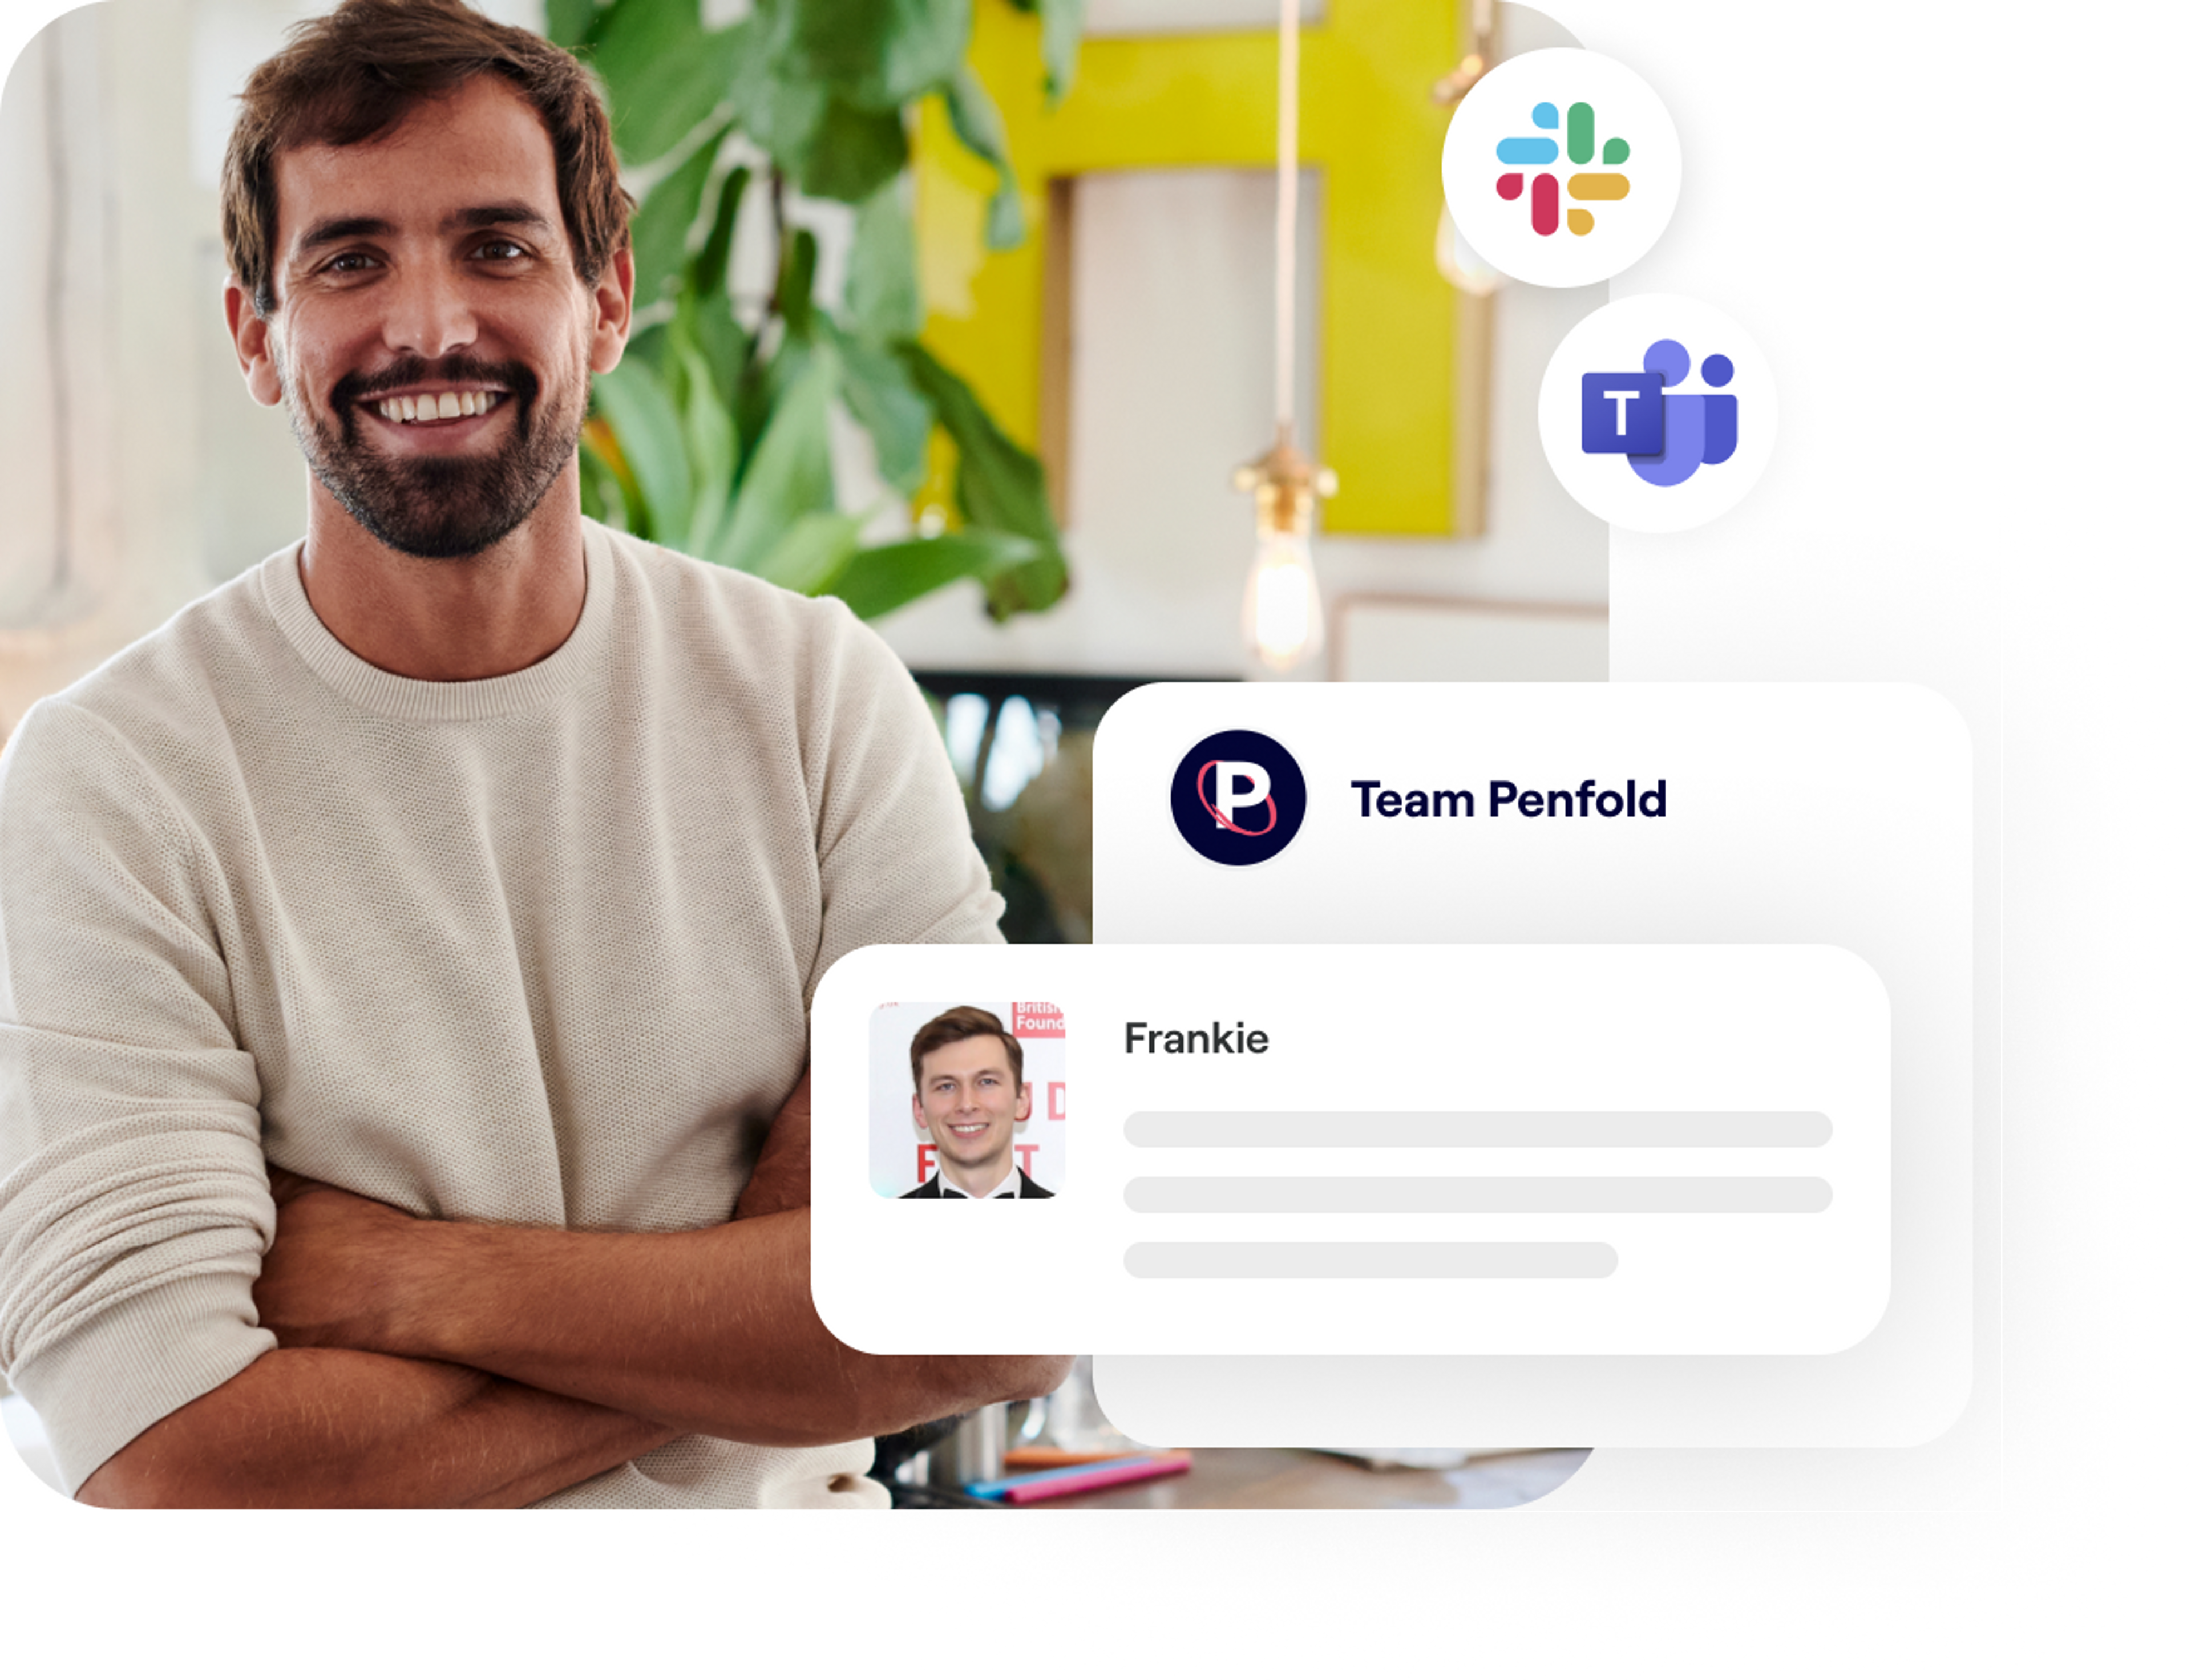 A photo of a man smiling and excerpts of Penfold support chat screens